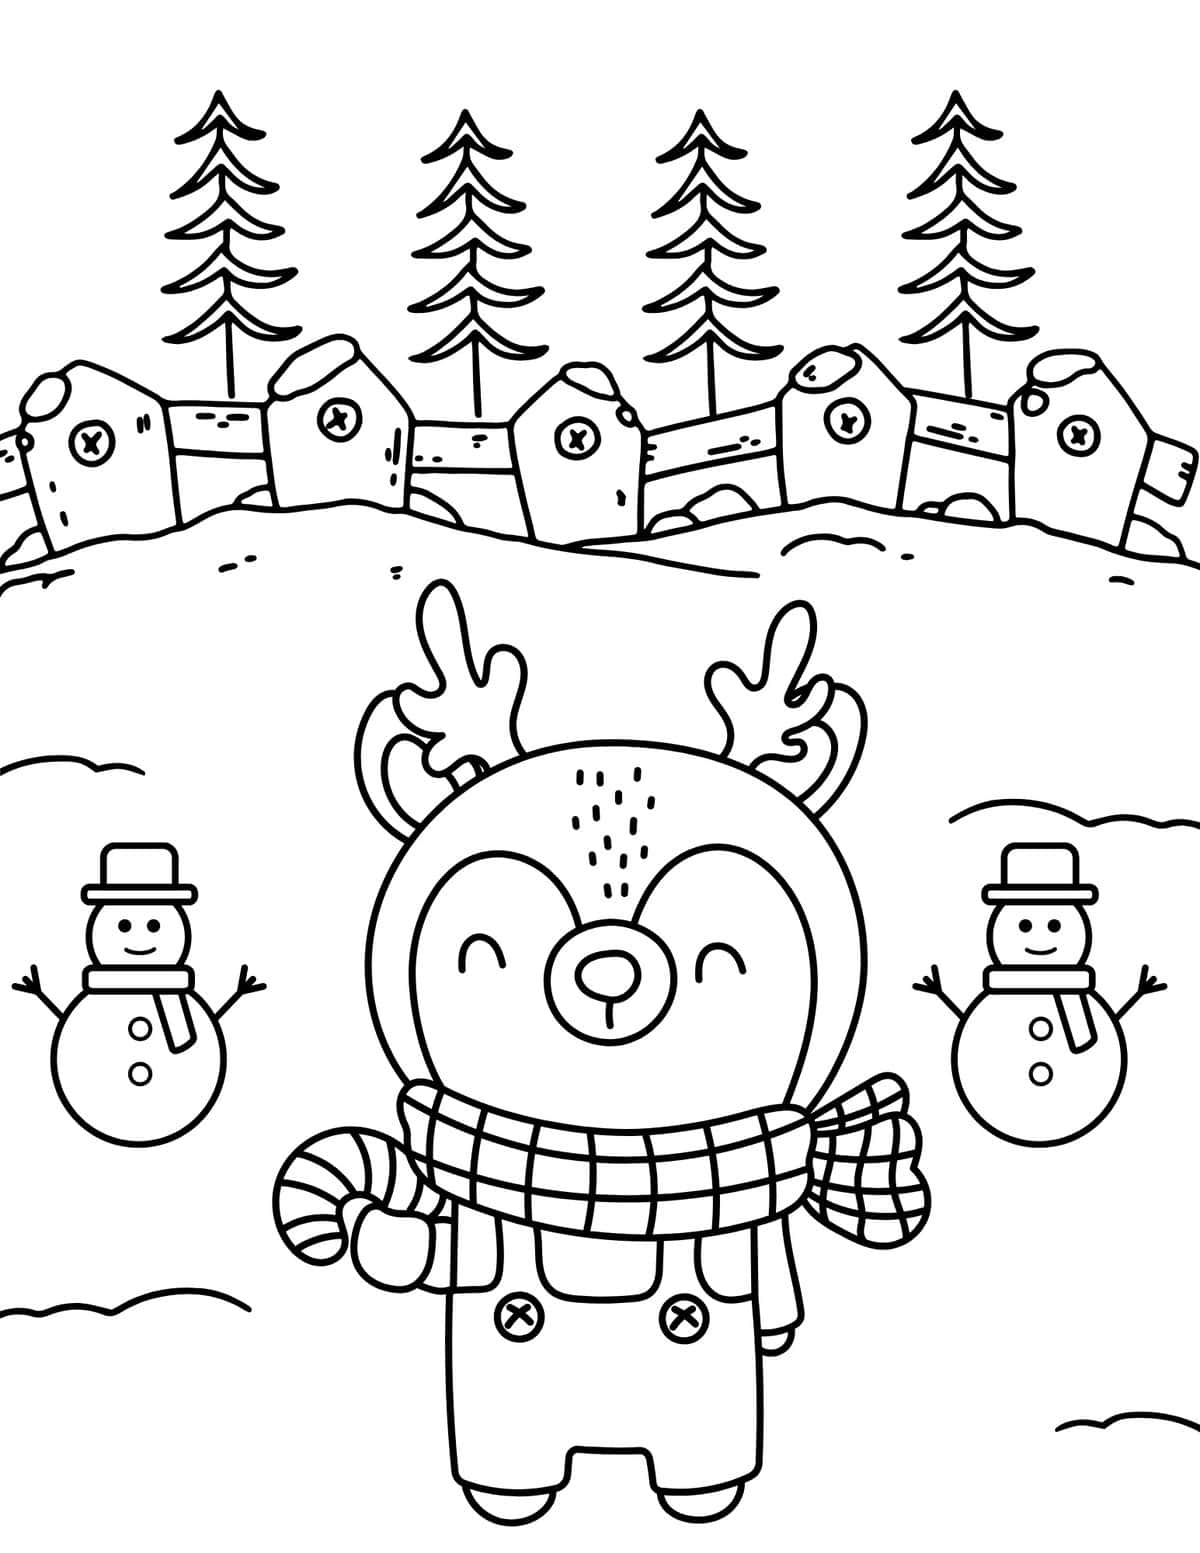 reindeer and snowmen Winter coloring pages